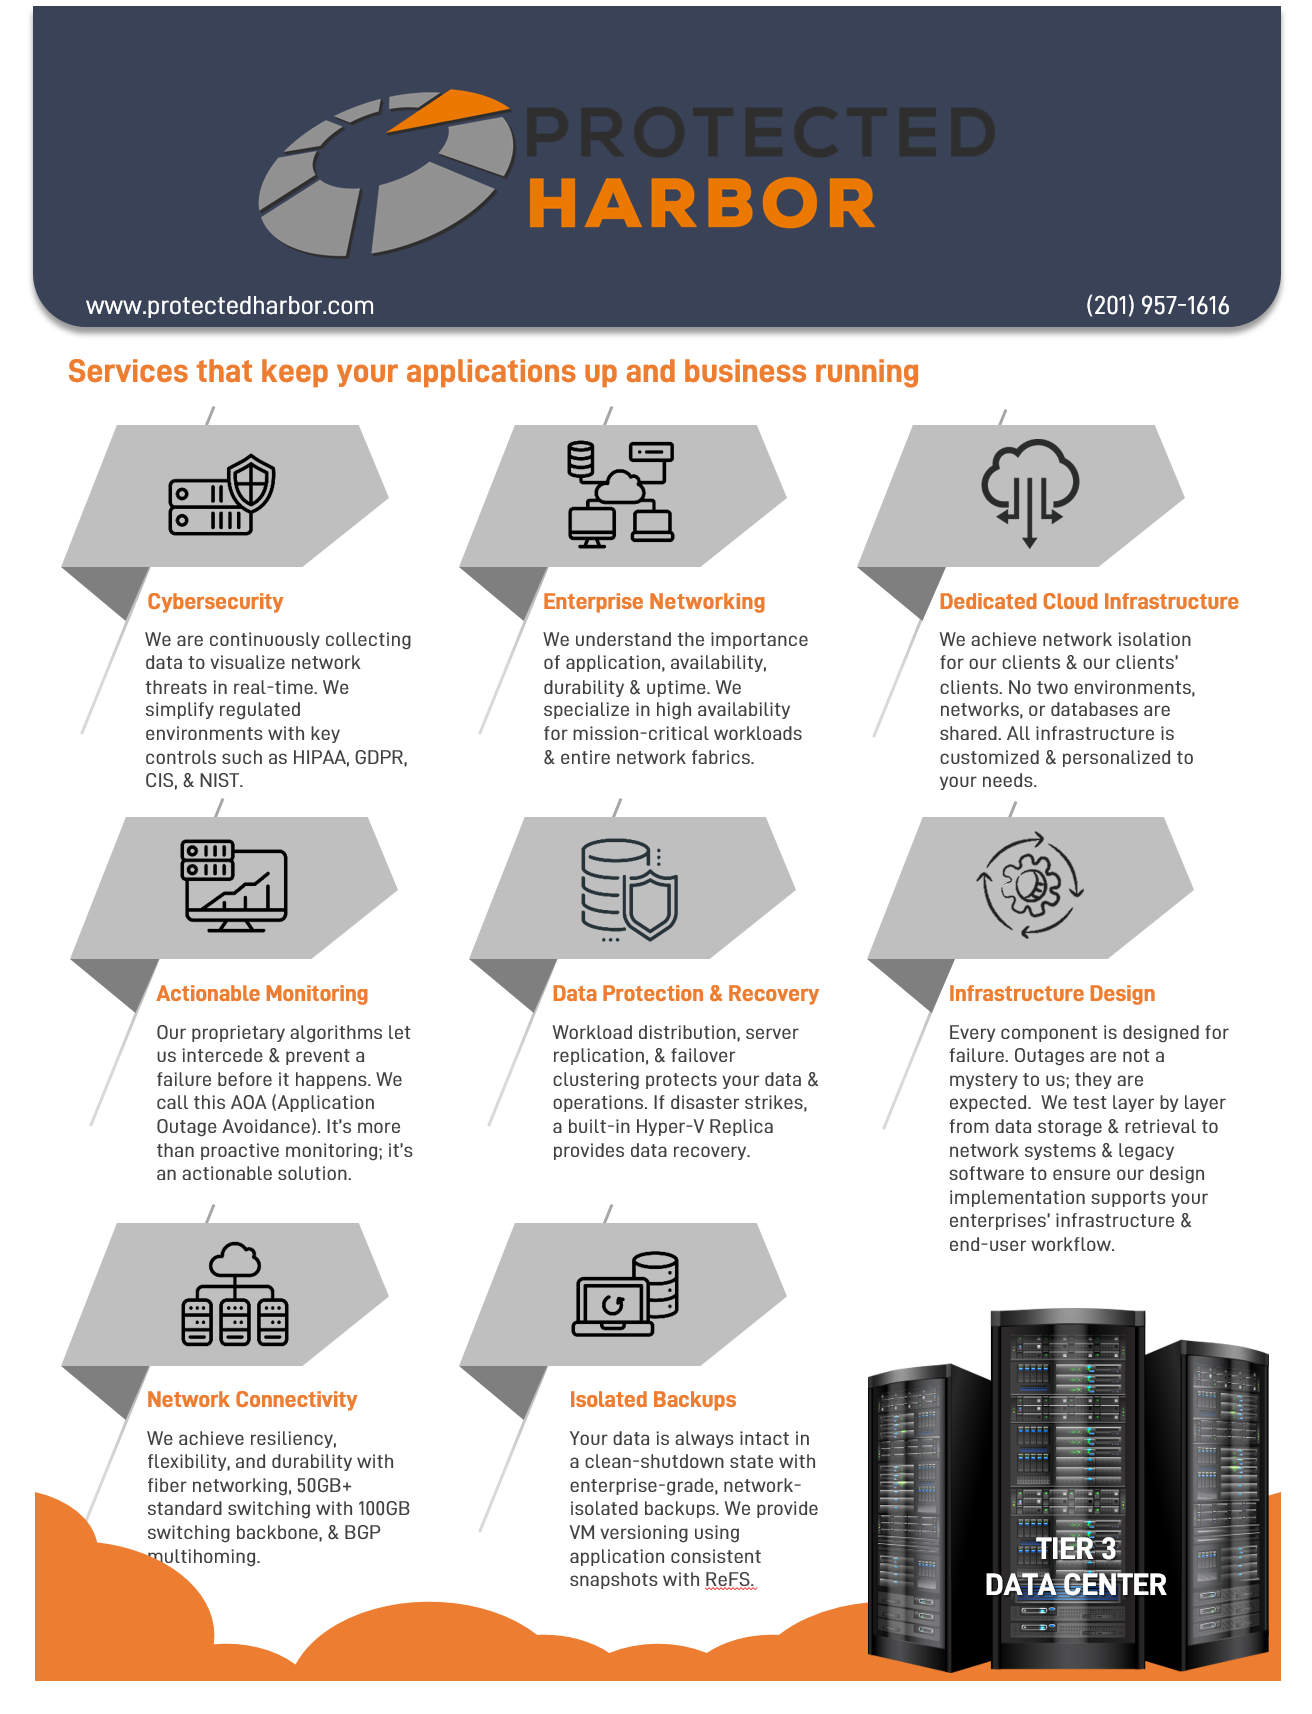 Protected Harbor Services and Solutions